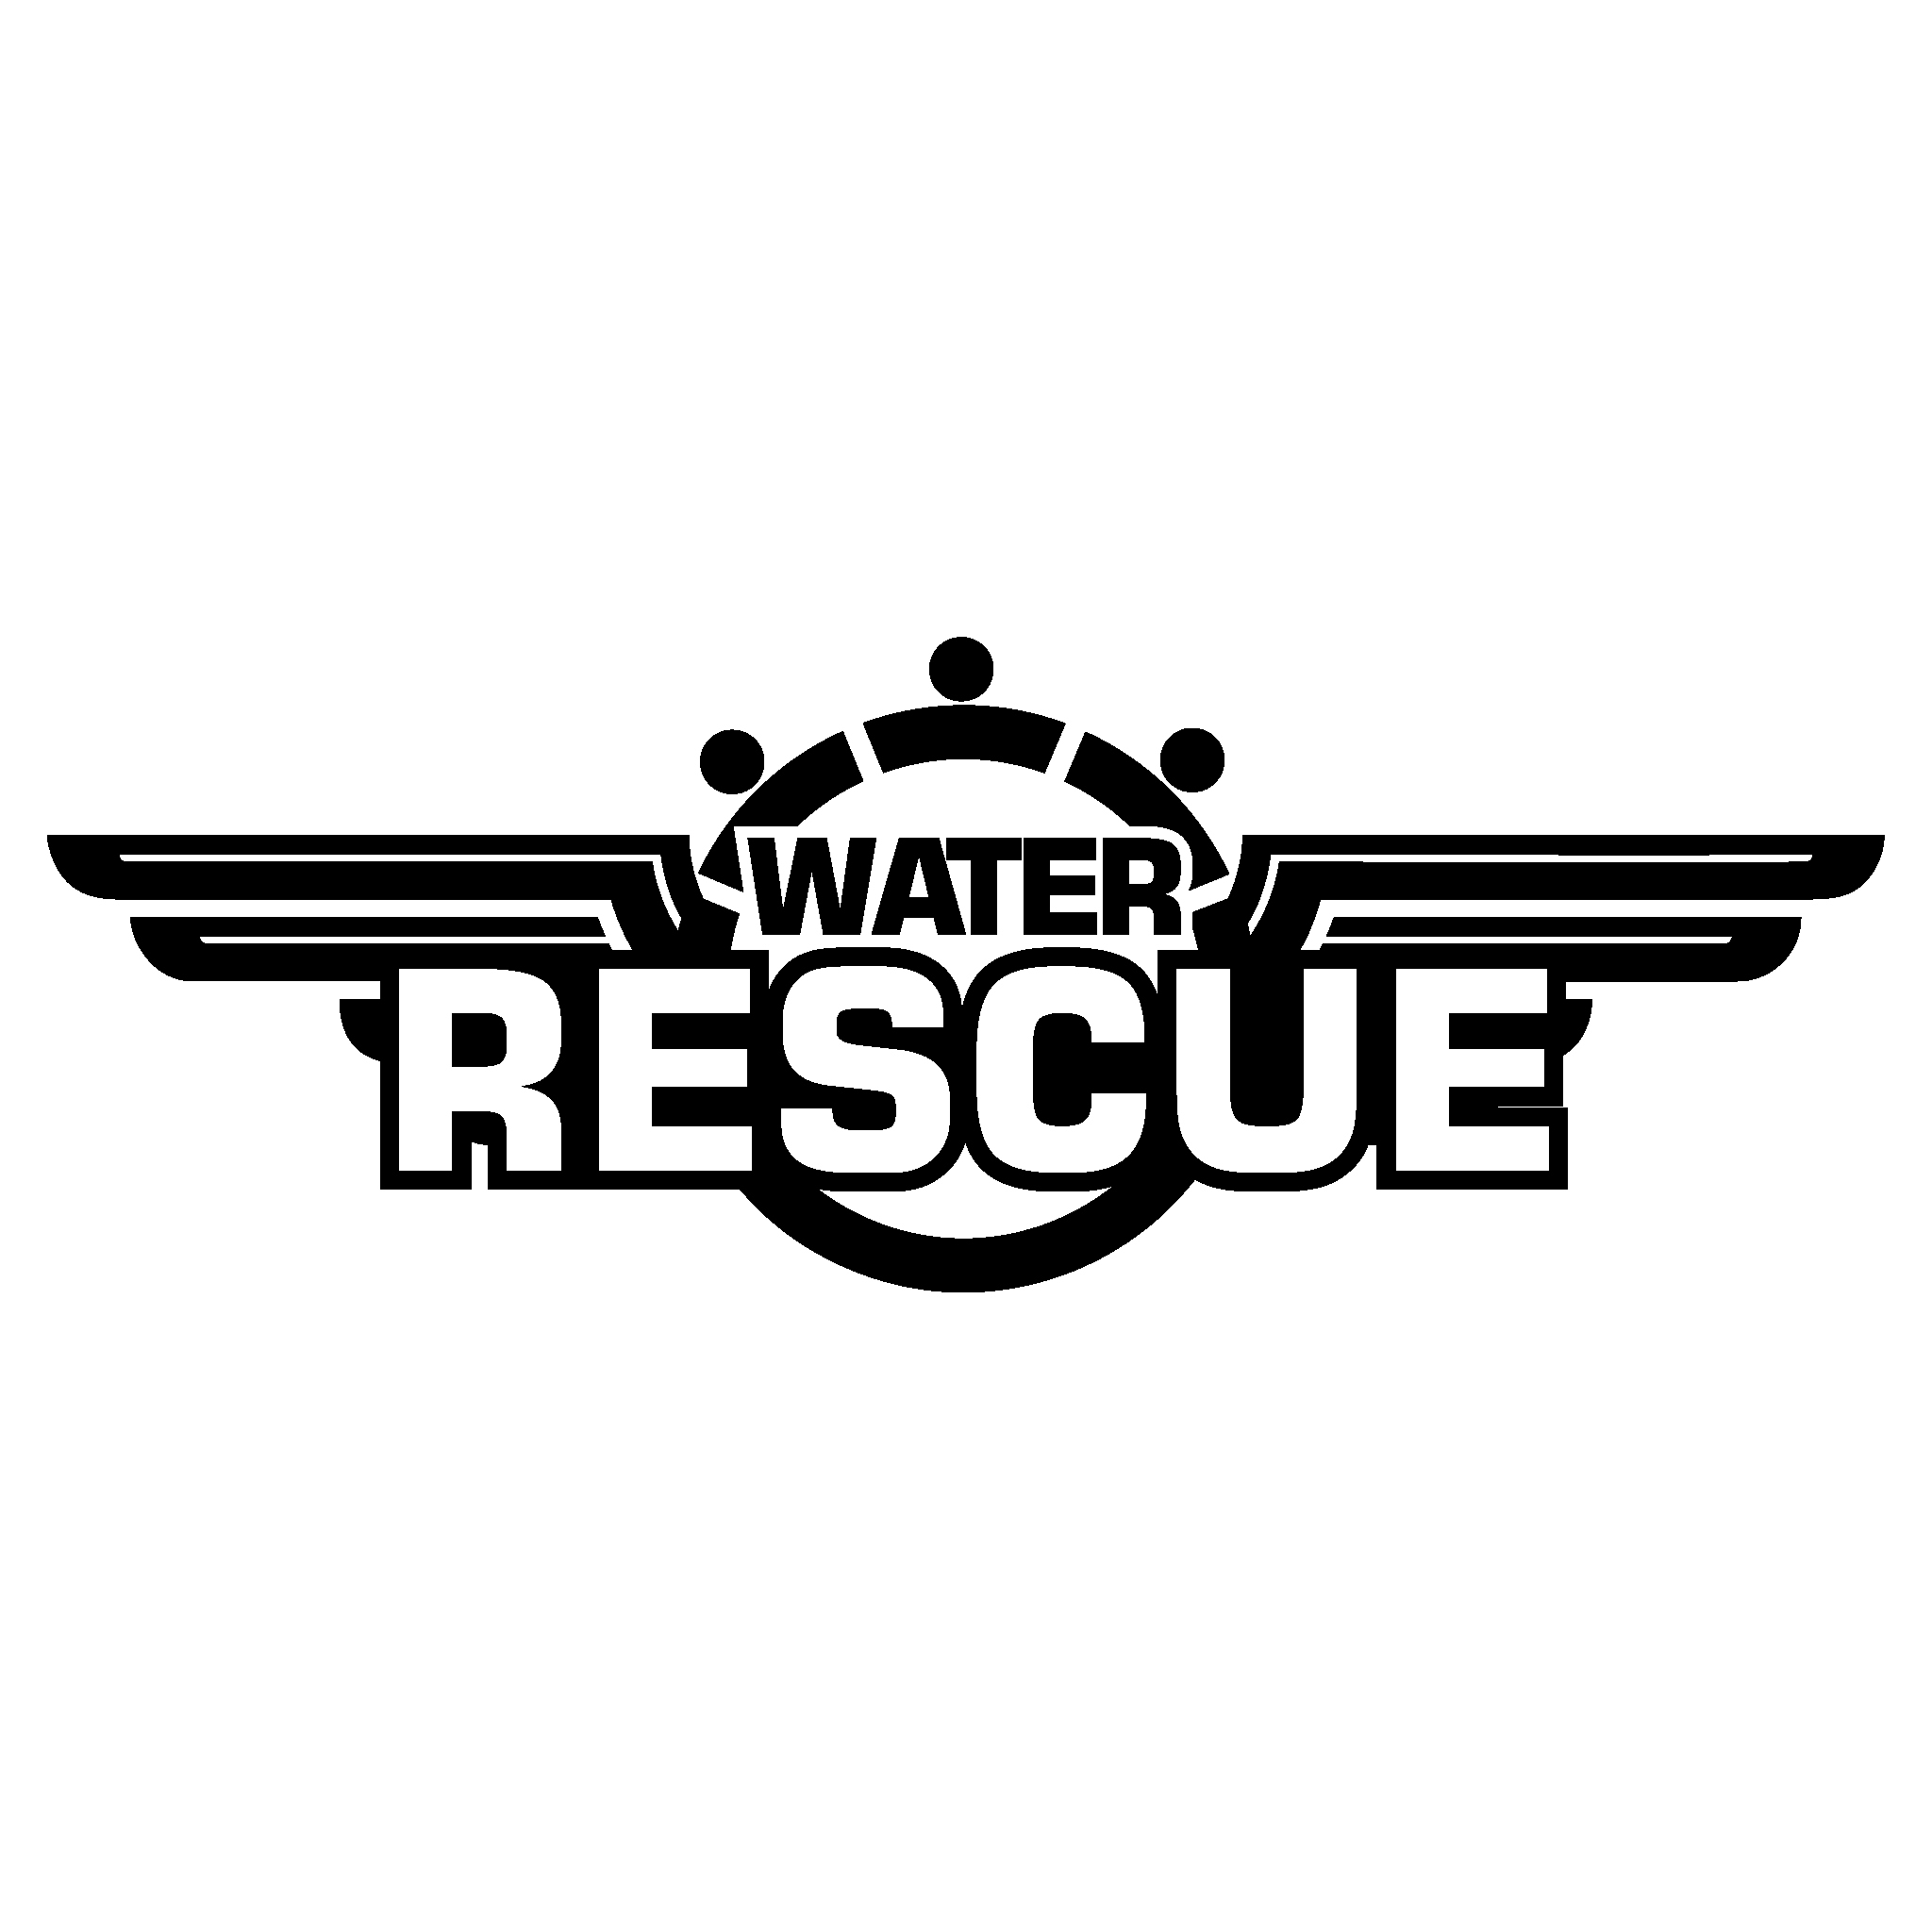 WATER RESCUE